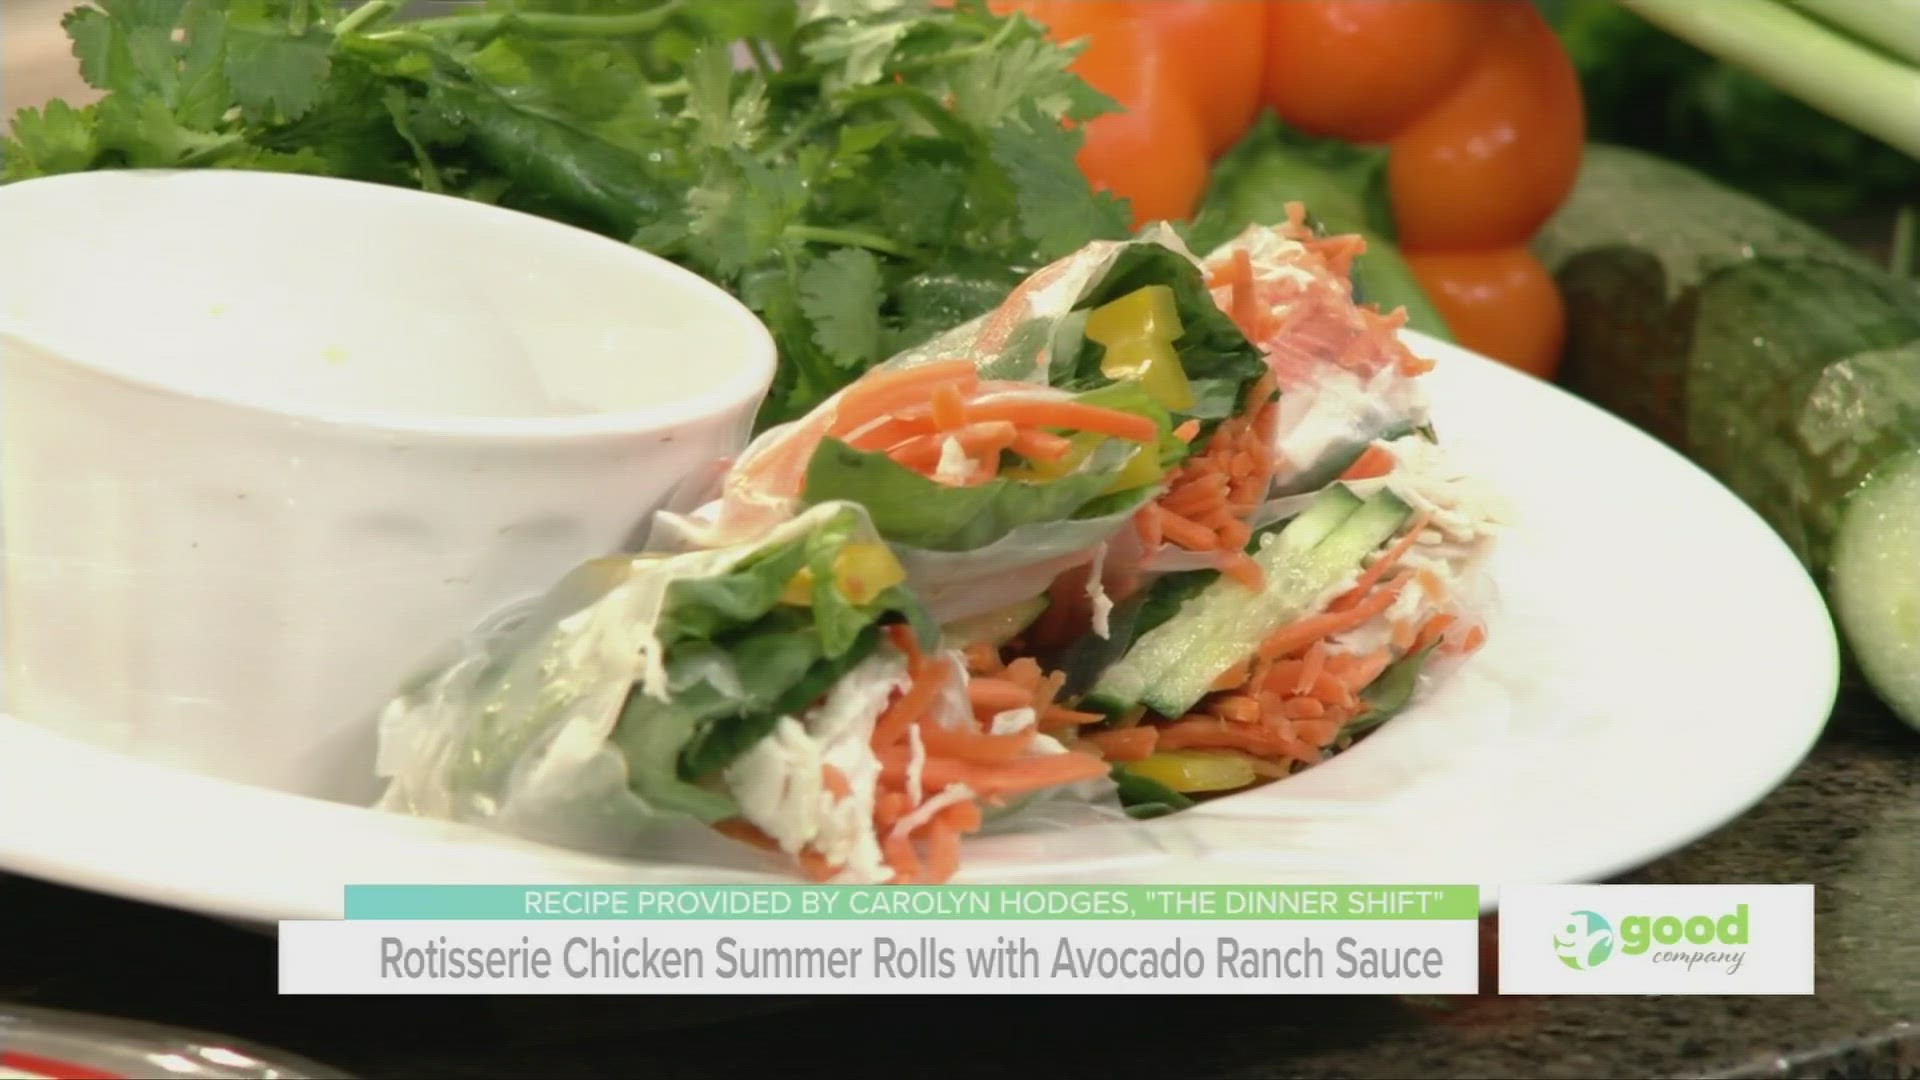 Hollie shows us the recipe for a perfect summer snack that requires no cooking!